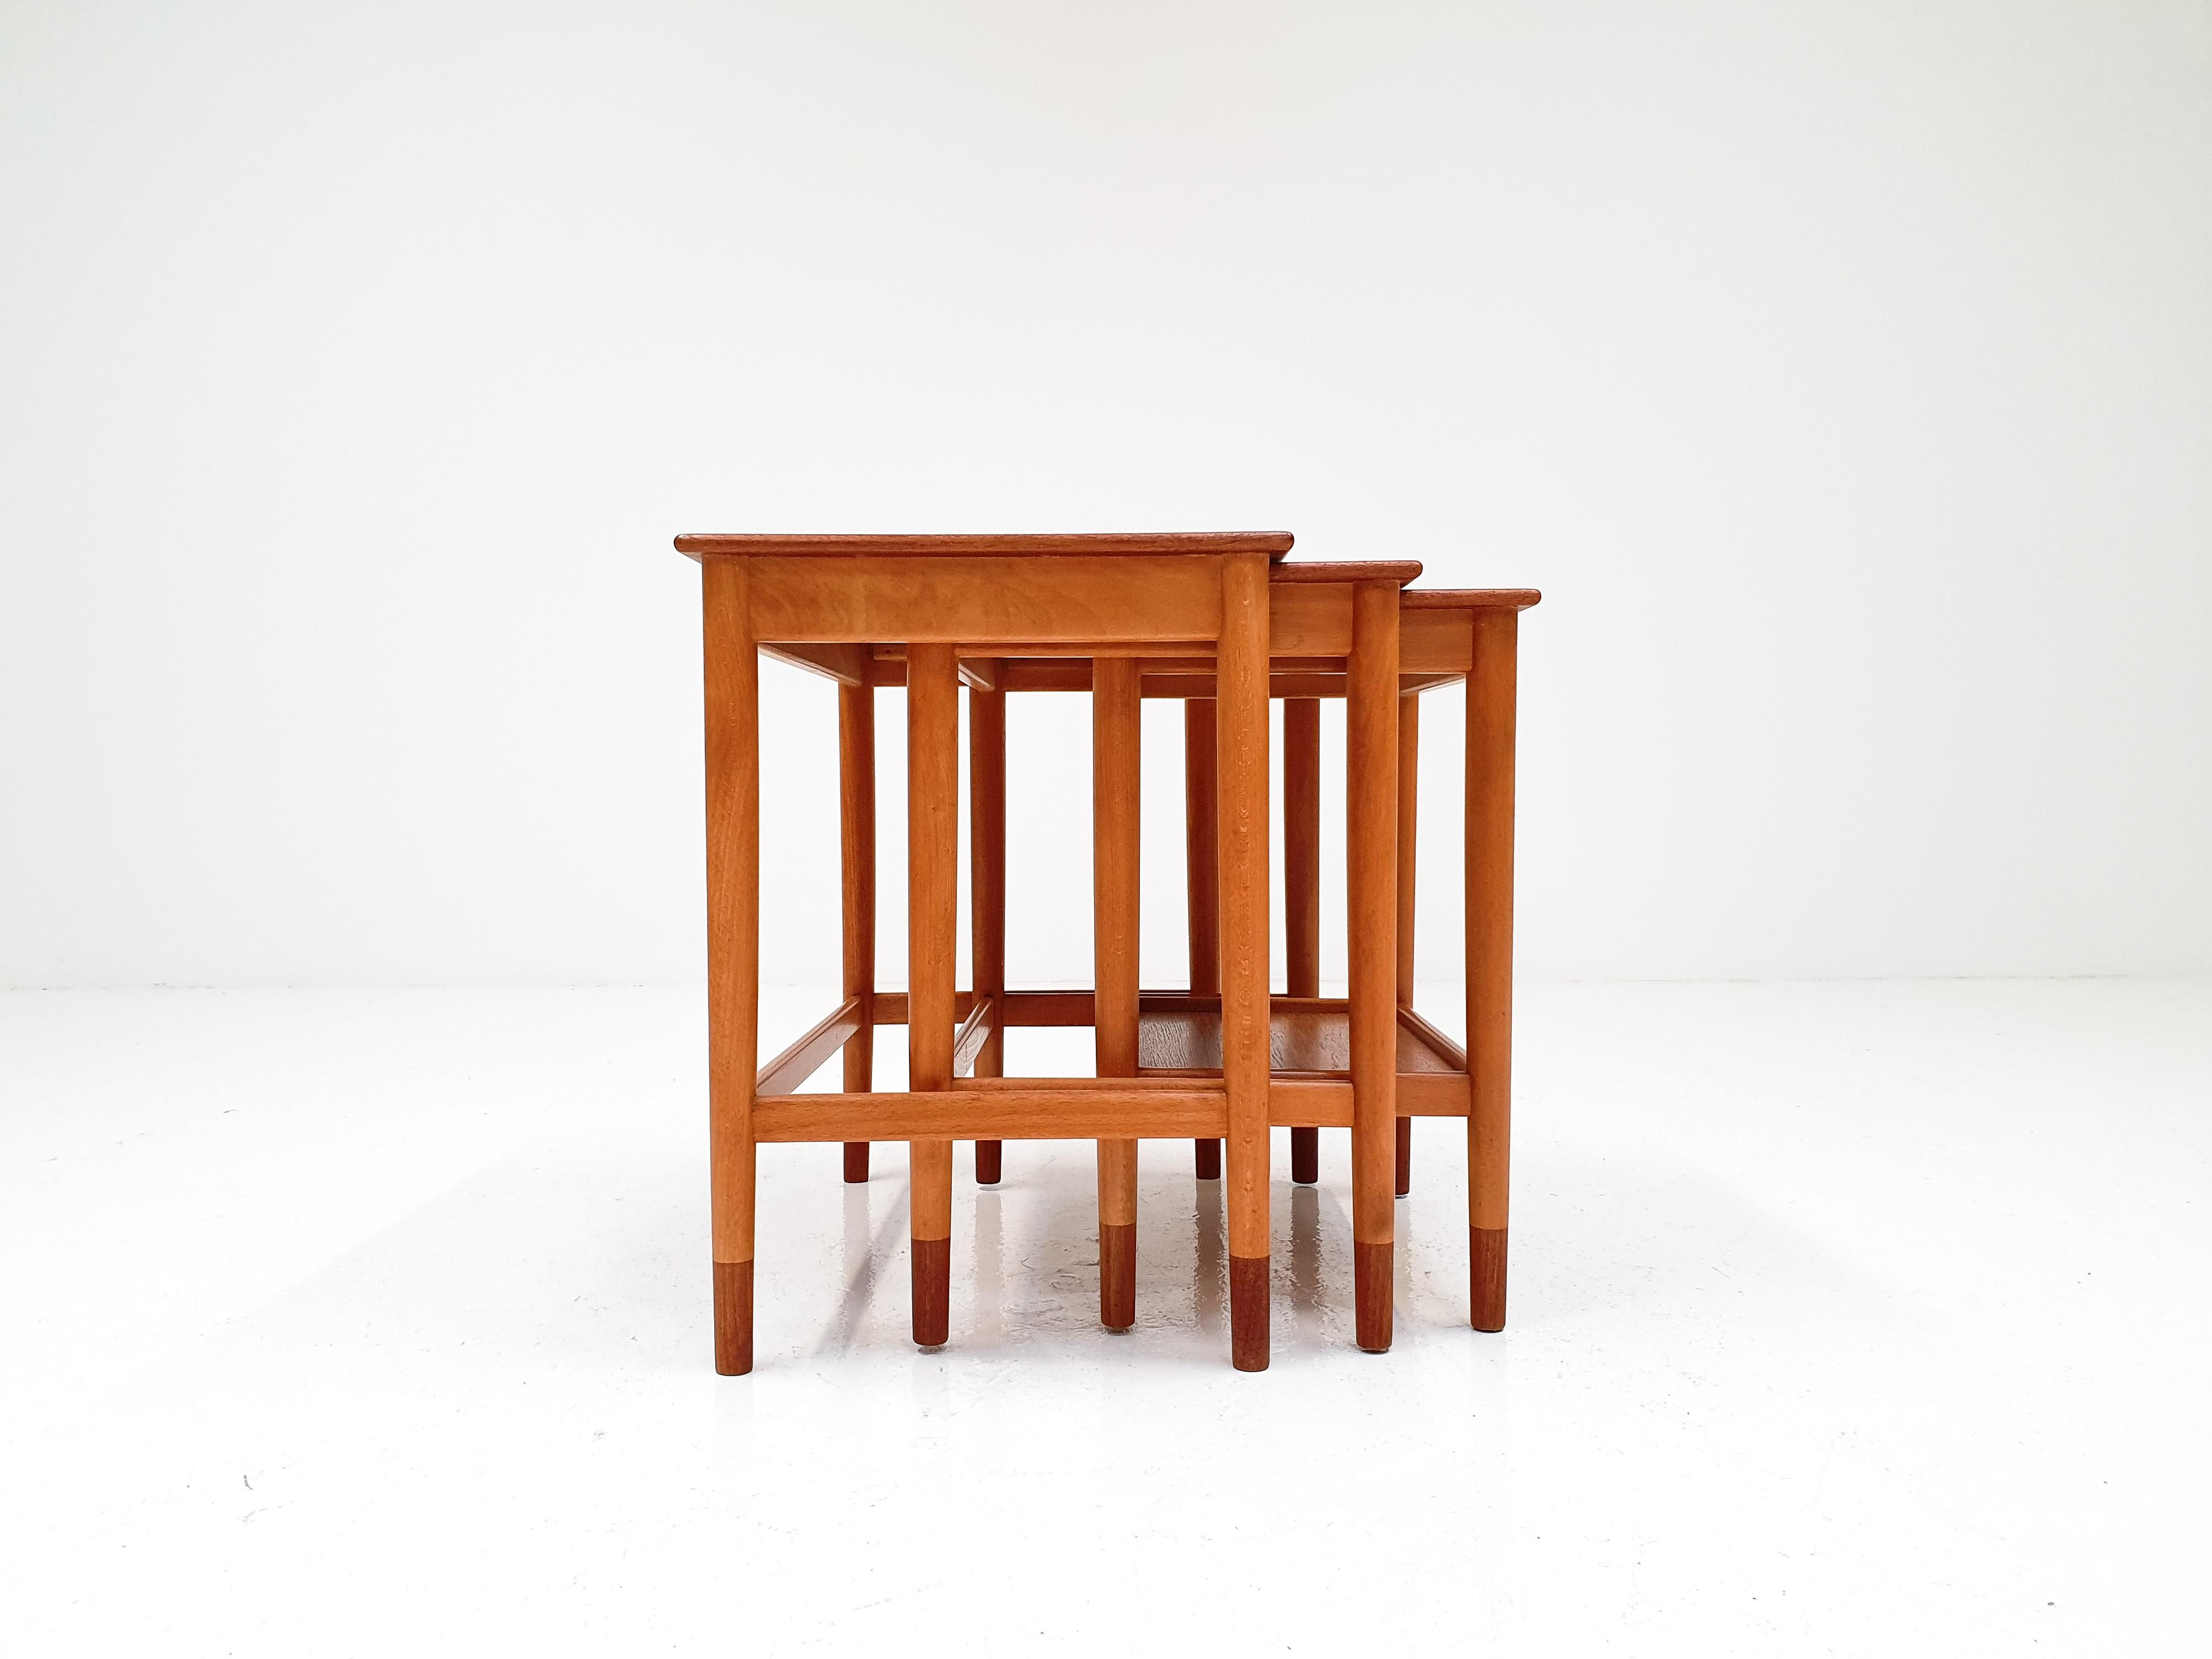 A set of nesting tables by Børge Mogensen. Manufactured by Søborg Møbelfabrik in Denmark, 1960s.

Made from both teak and beech, with teak tabletops and feet and beech frames the contrast in woods offers a very attractive contrast.

The timeless